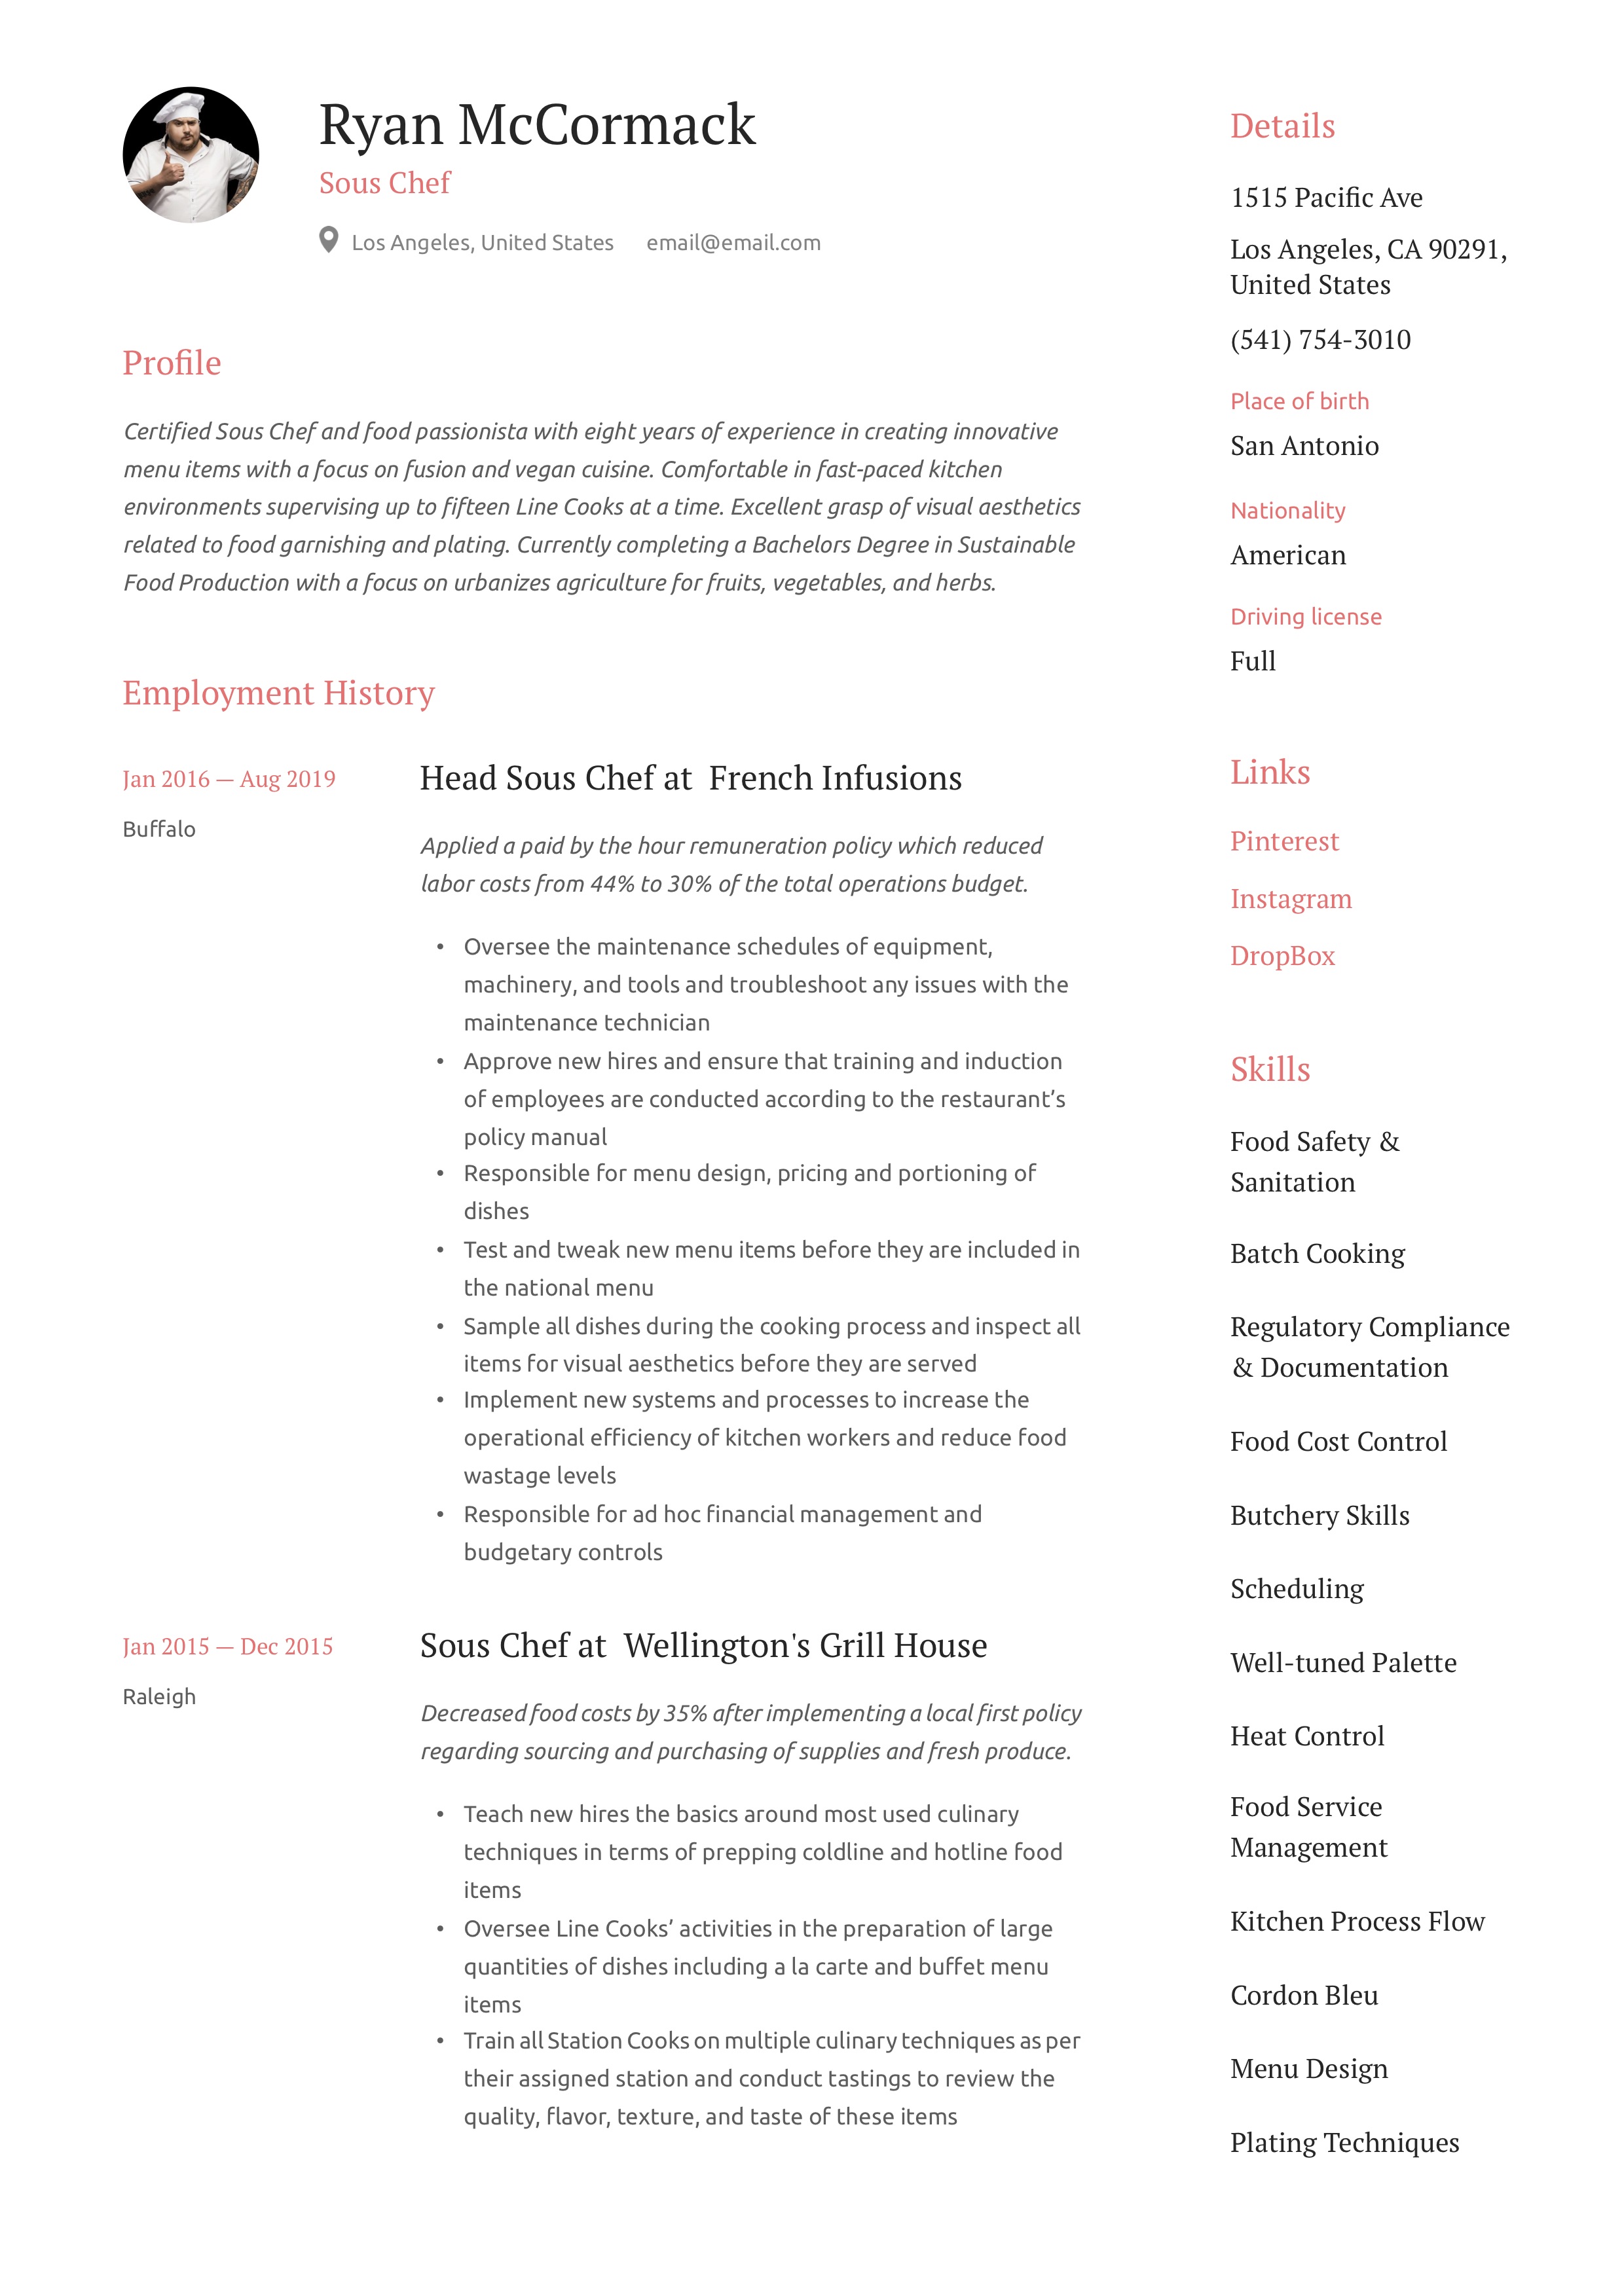 Resume Sample Sous Chef